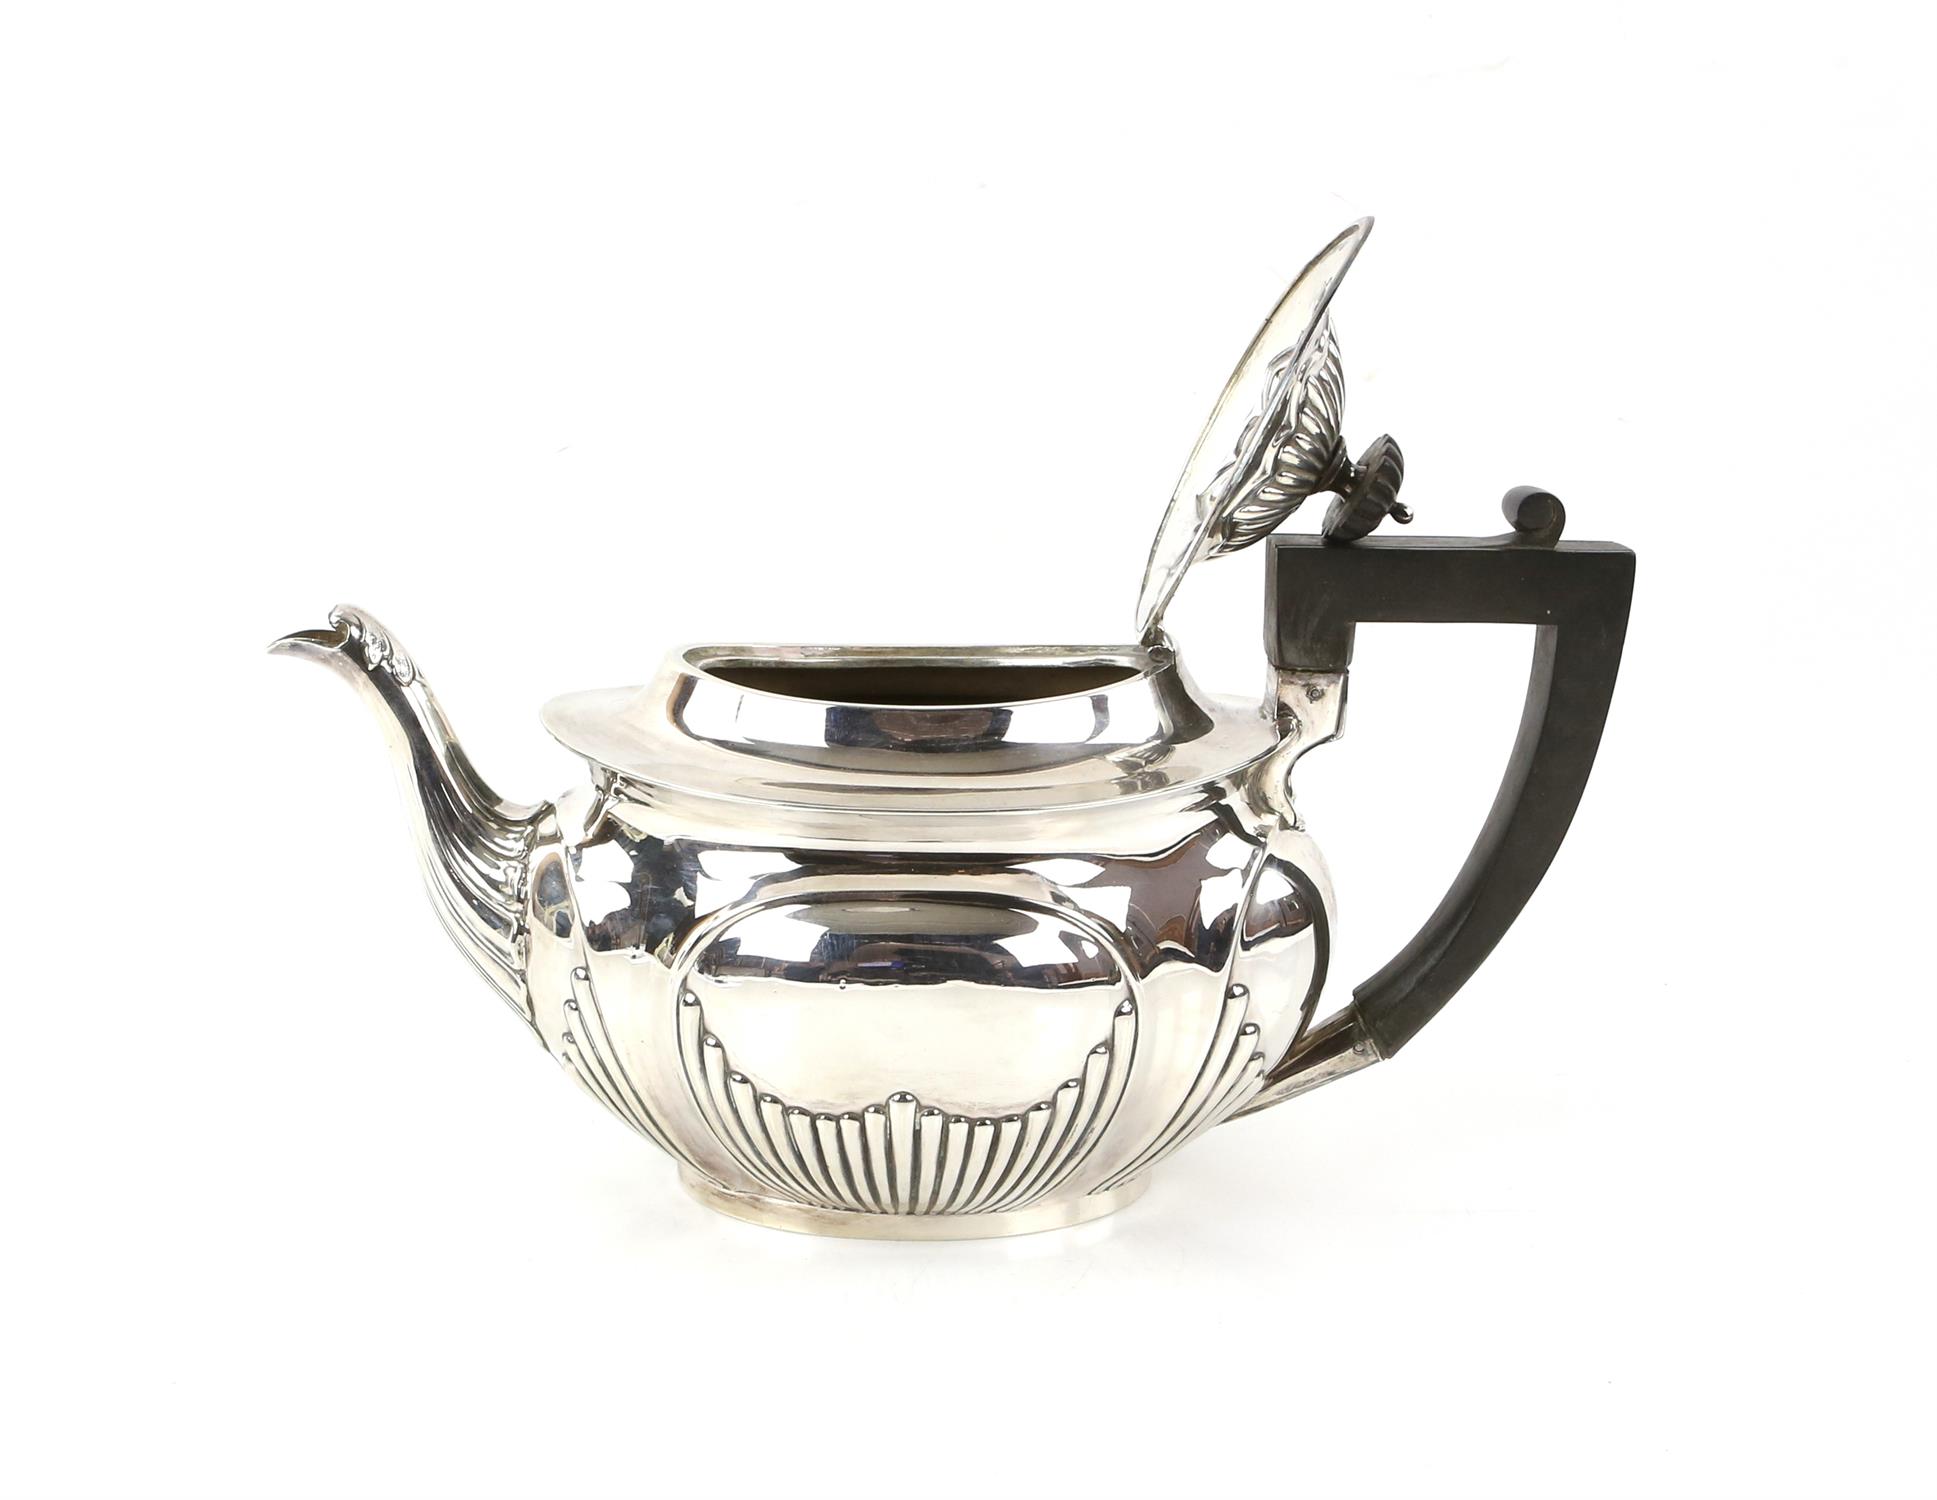 Victorian silver teapot with bulbous form and gadrooned decoration, by Mark Willis, Sheffield, 1896, - Image 2 of 5